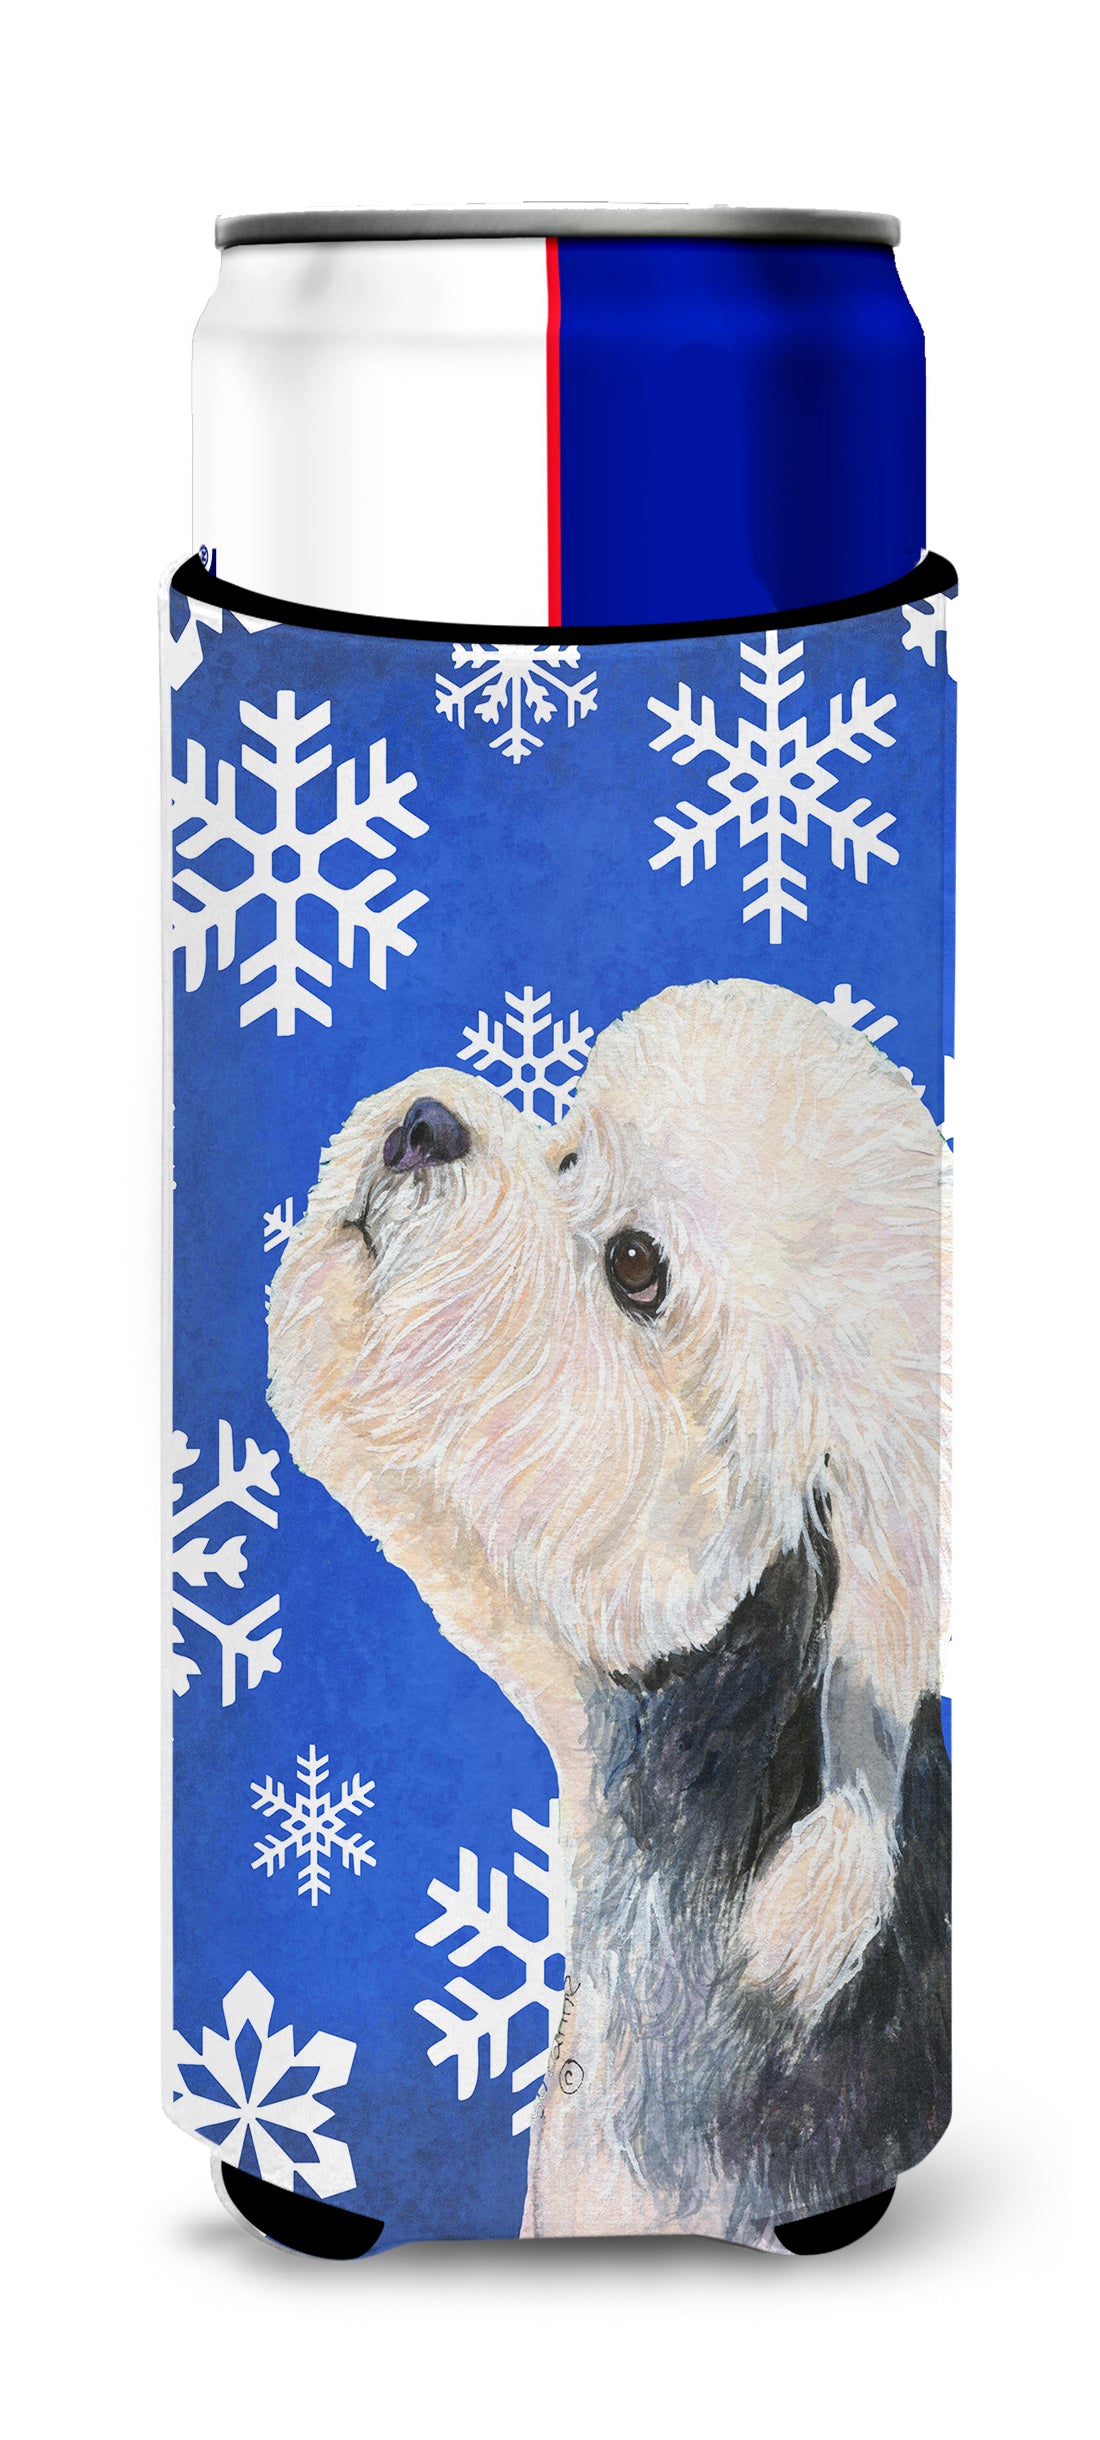 Dandie Dinmont Terrier Winter Snowflakes Holiday Ultra Beverage Insulators for slim cans SS4641MUK.